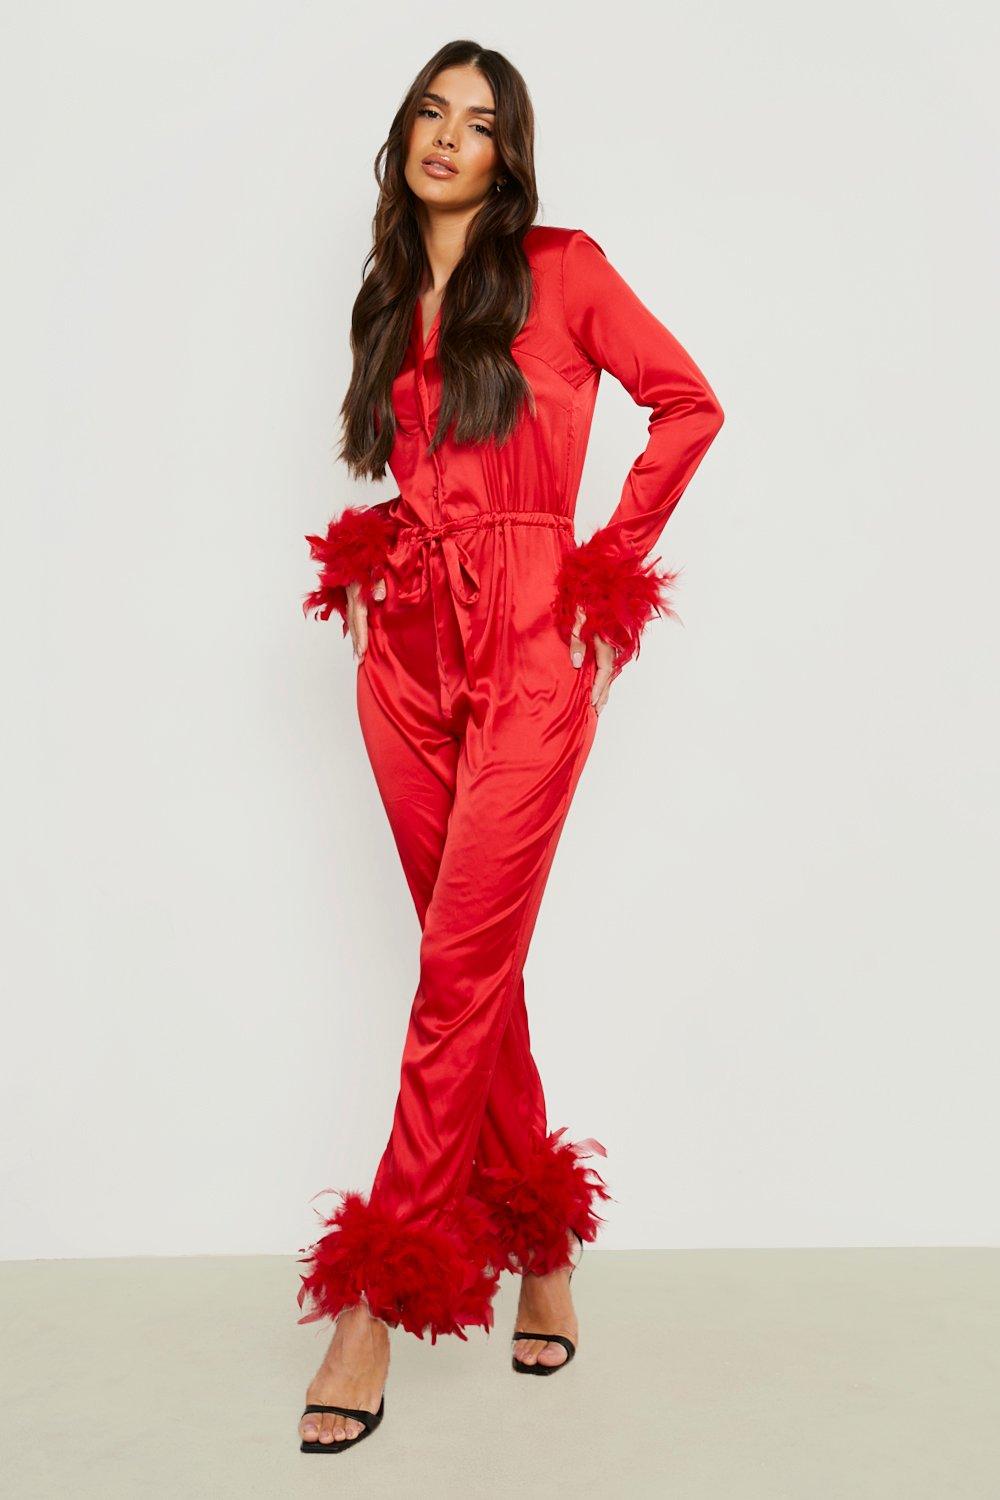 Boohoo Satin Feather Detail Jumpsuit in Red Womens Clothing Jumpsuits and rompers Full-length jumpsuits and rompers 